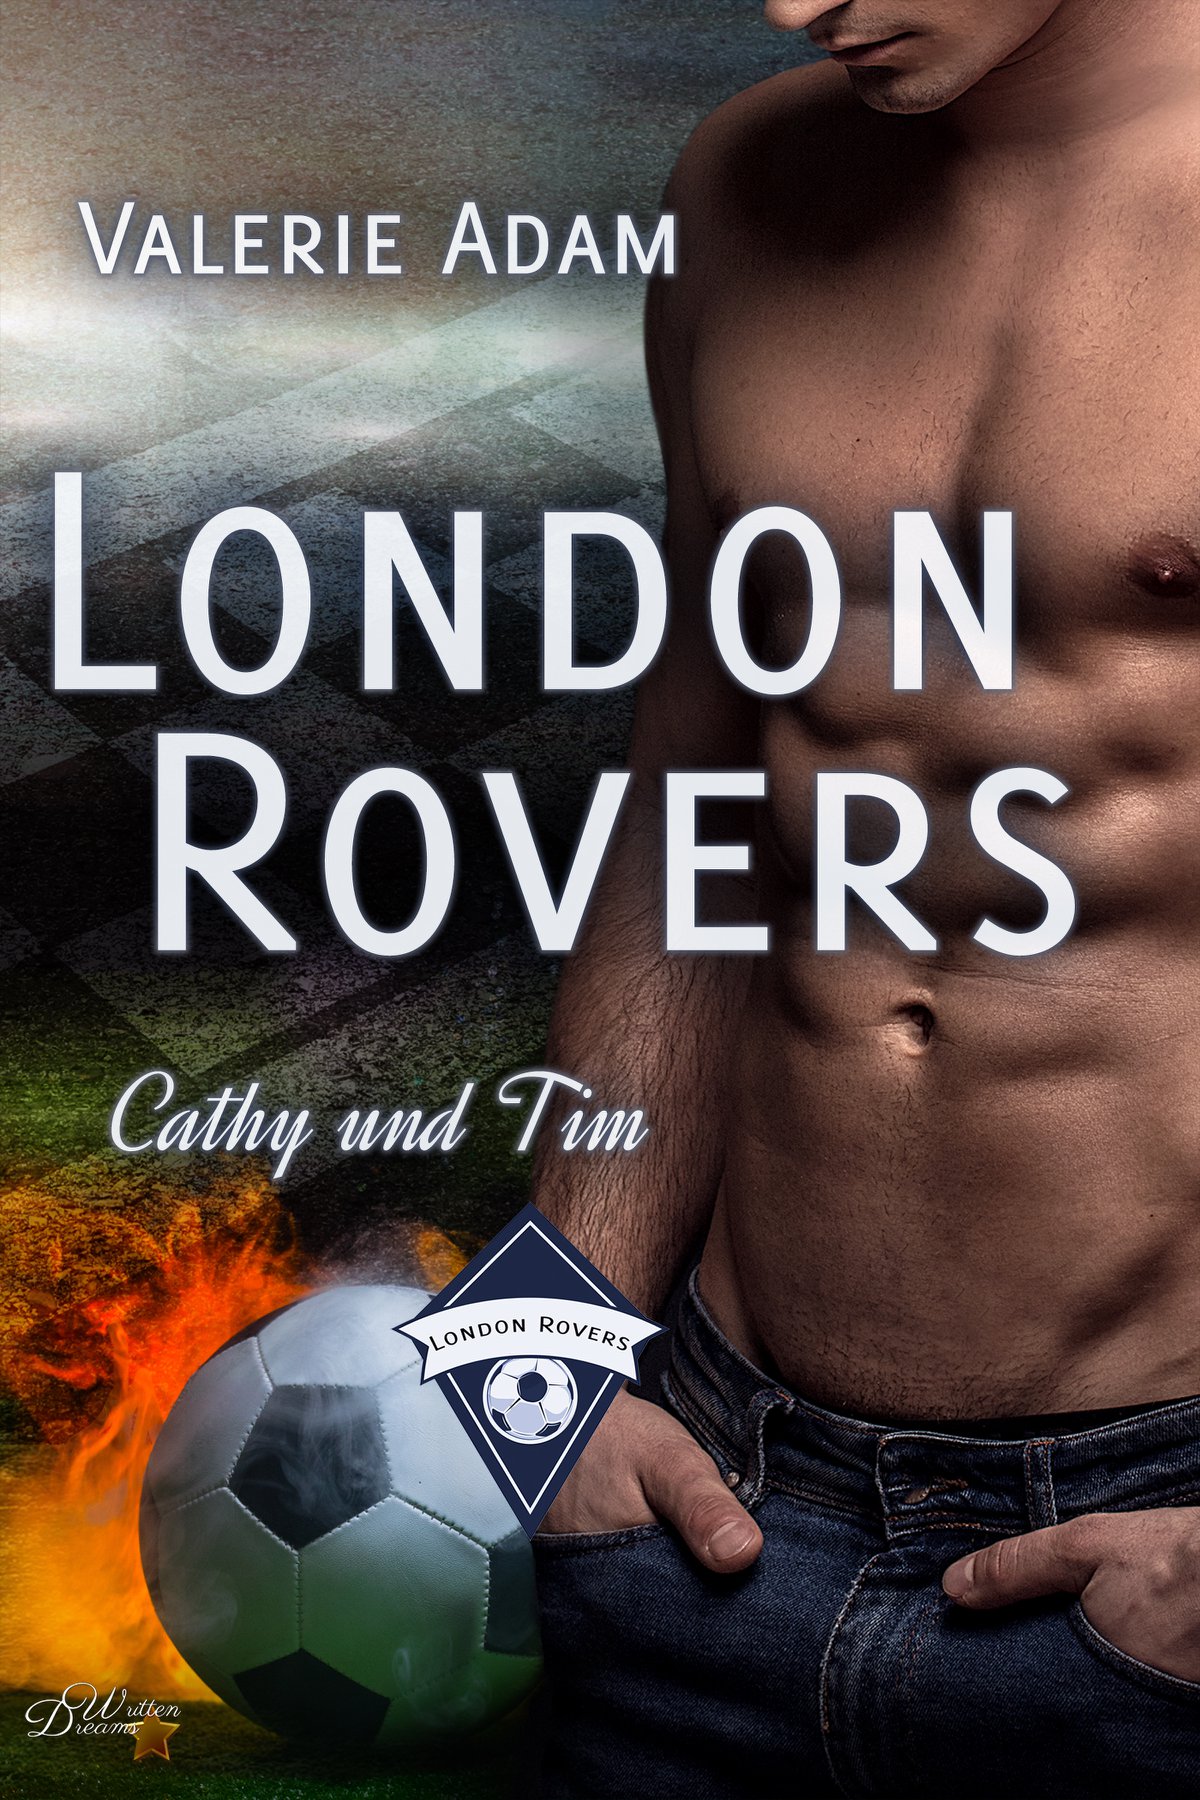 You are currently viewing London Rovers – Cathy und Tim – Valerie Adam